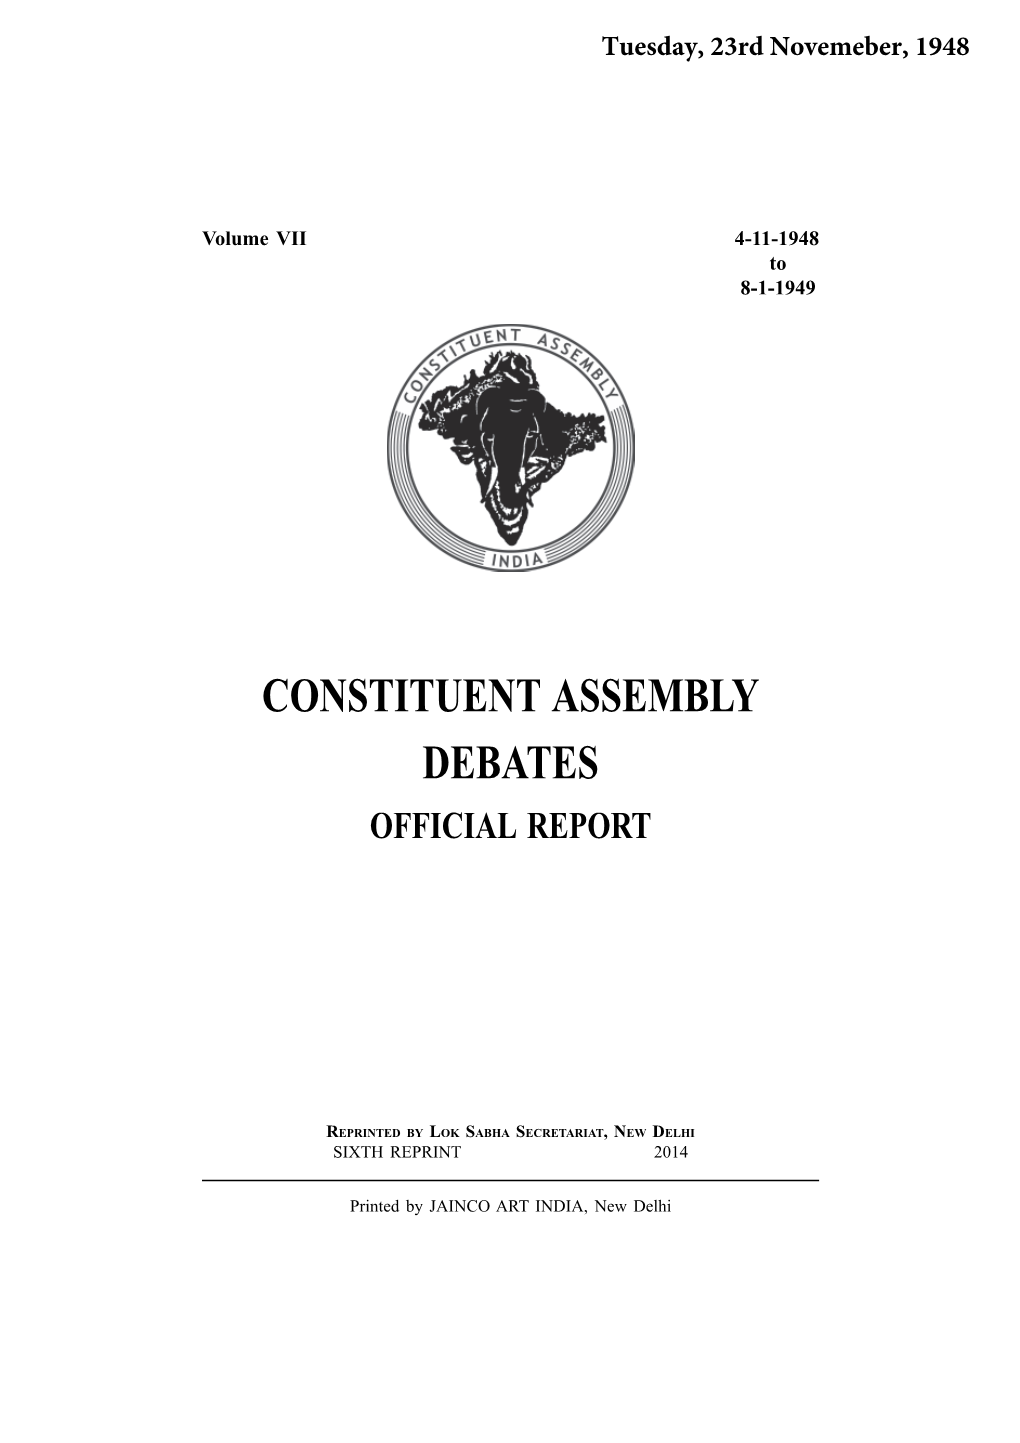 Constituent Assembly Debates Official Report